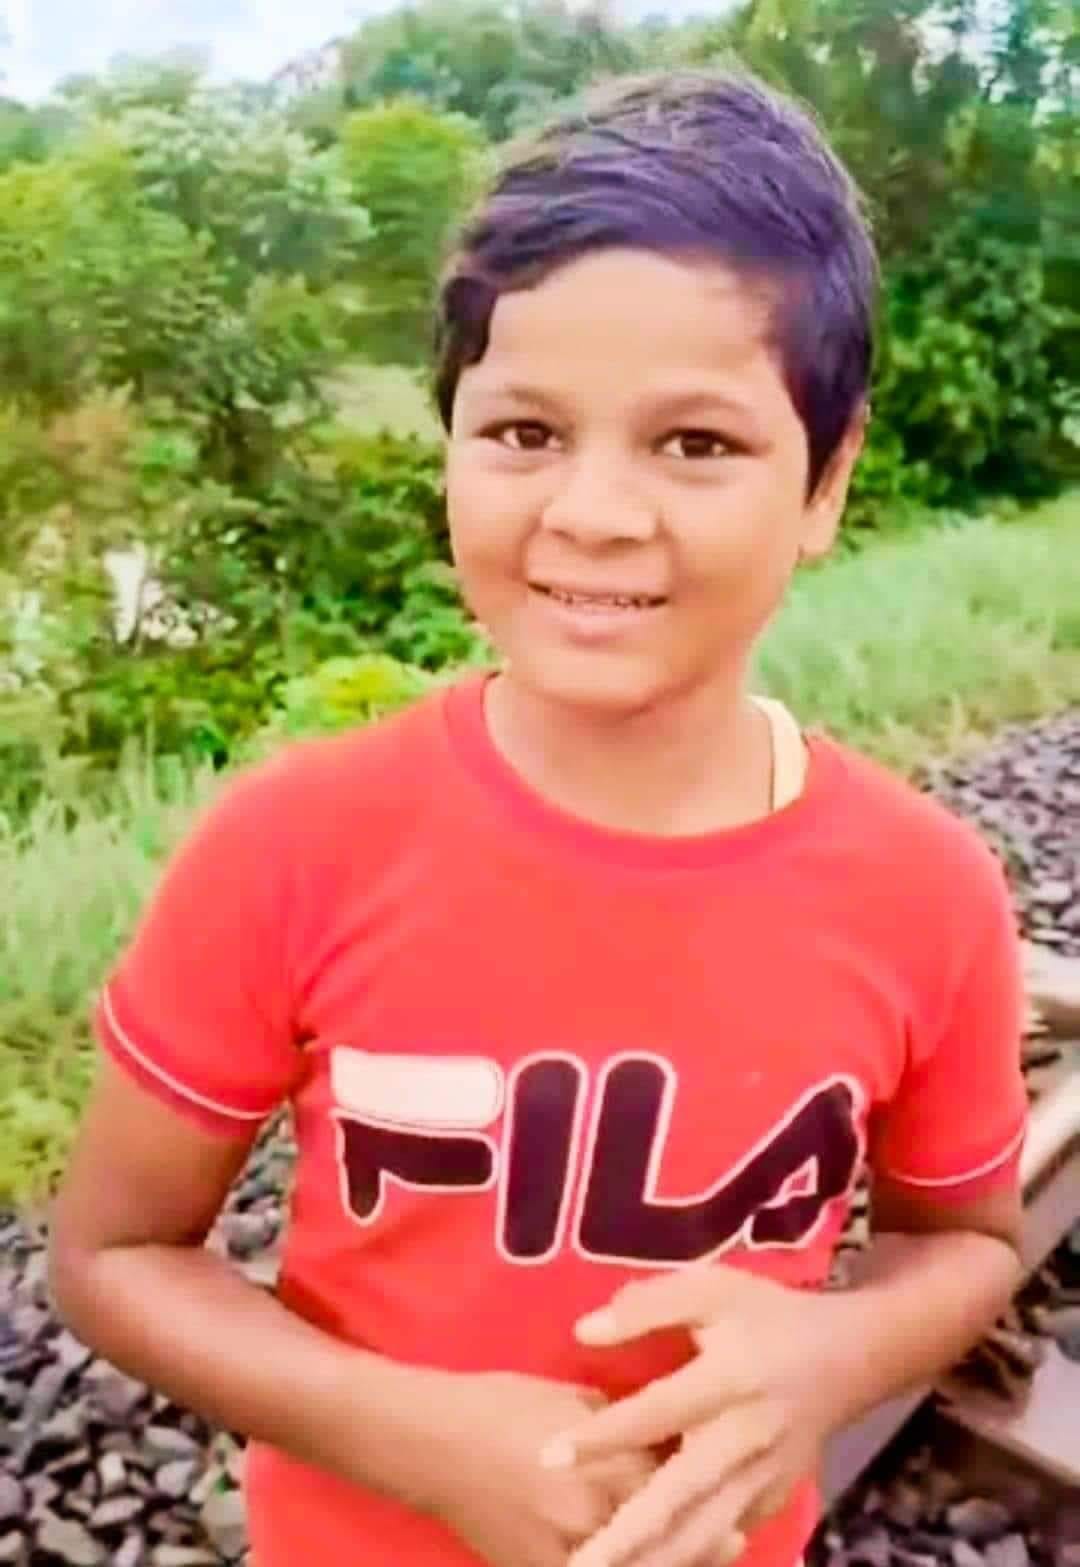 Kid Of Malda (WB) Who Saved Train From Major Accident Gets Heroic Felicitation